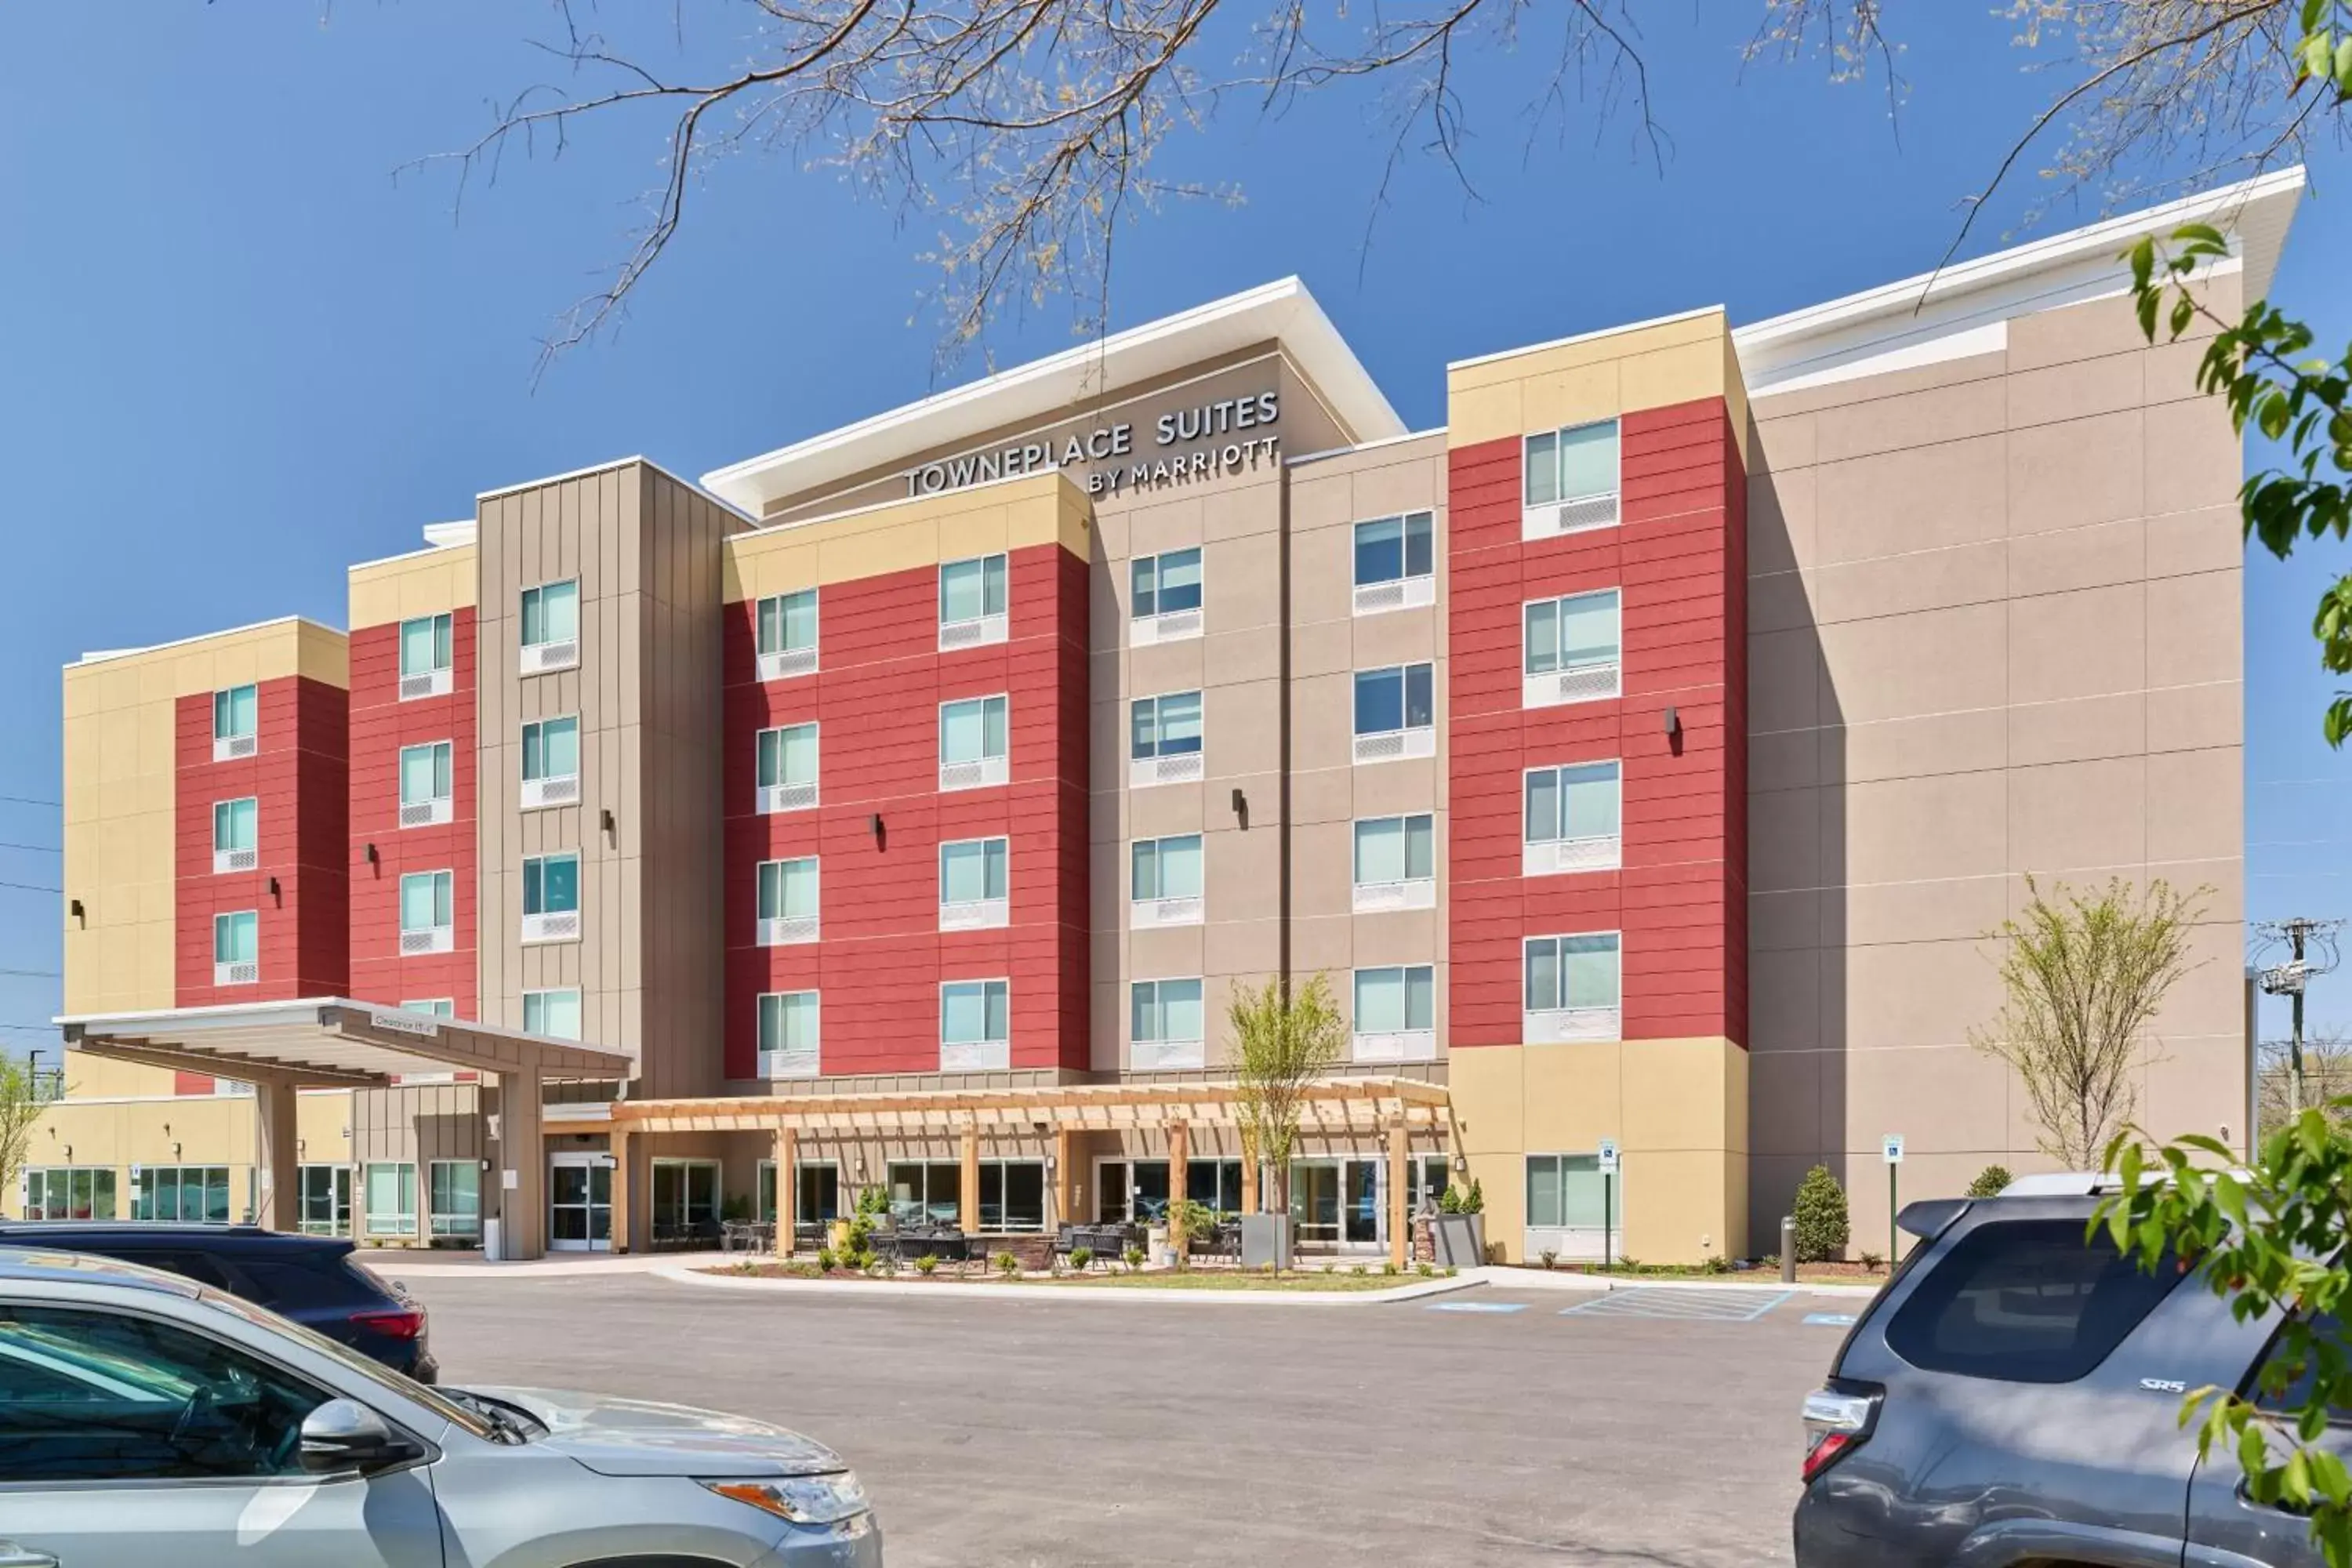 Property Building in TownePlace Suites by Marriott Hixson